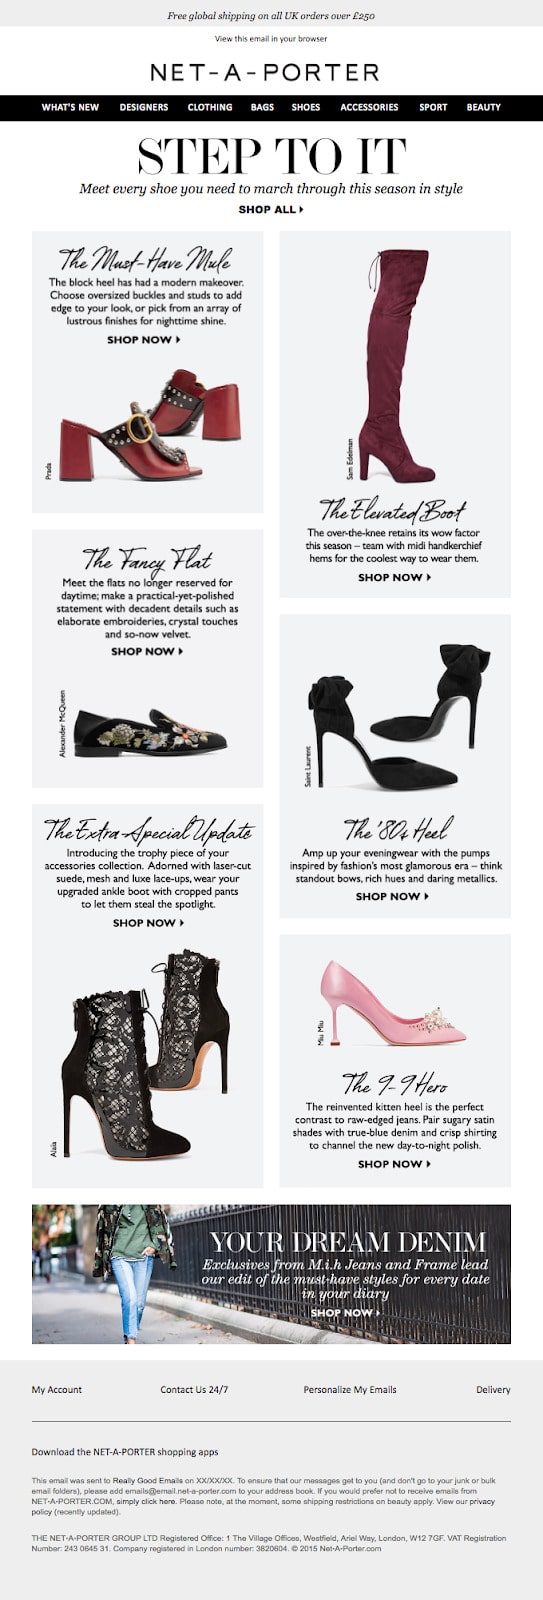 Another great reason to use web-fonts is that they help you create and portray a brand’s online personality. Here’s a great example from Net-A-Porter.